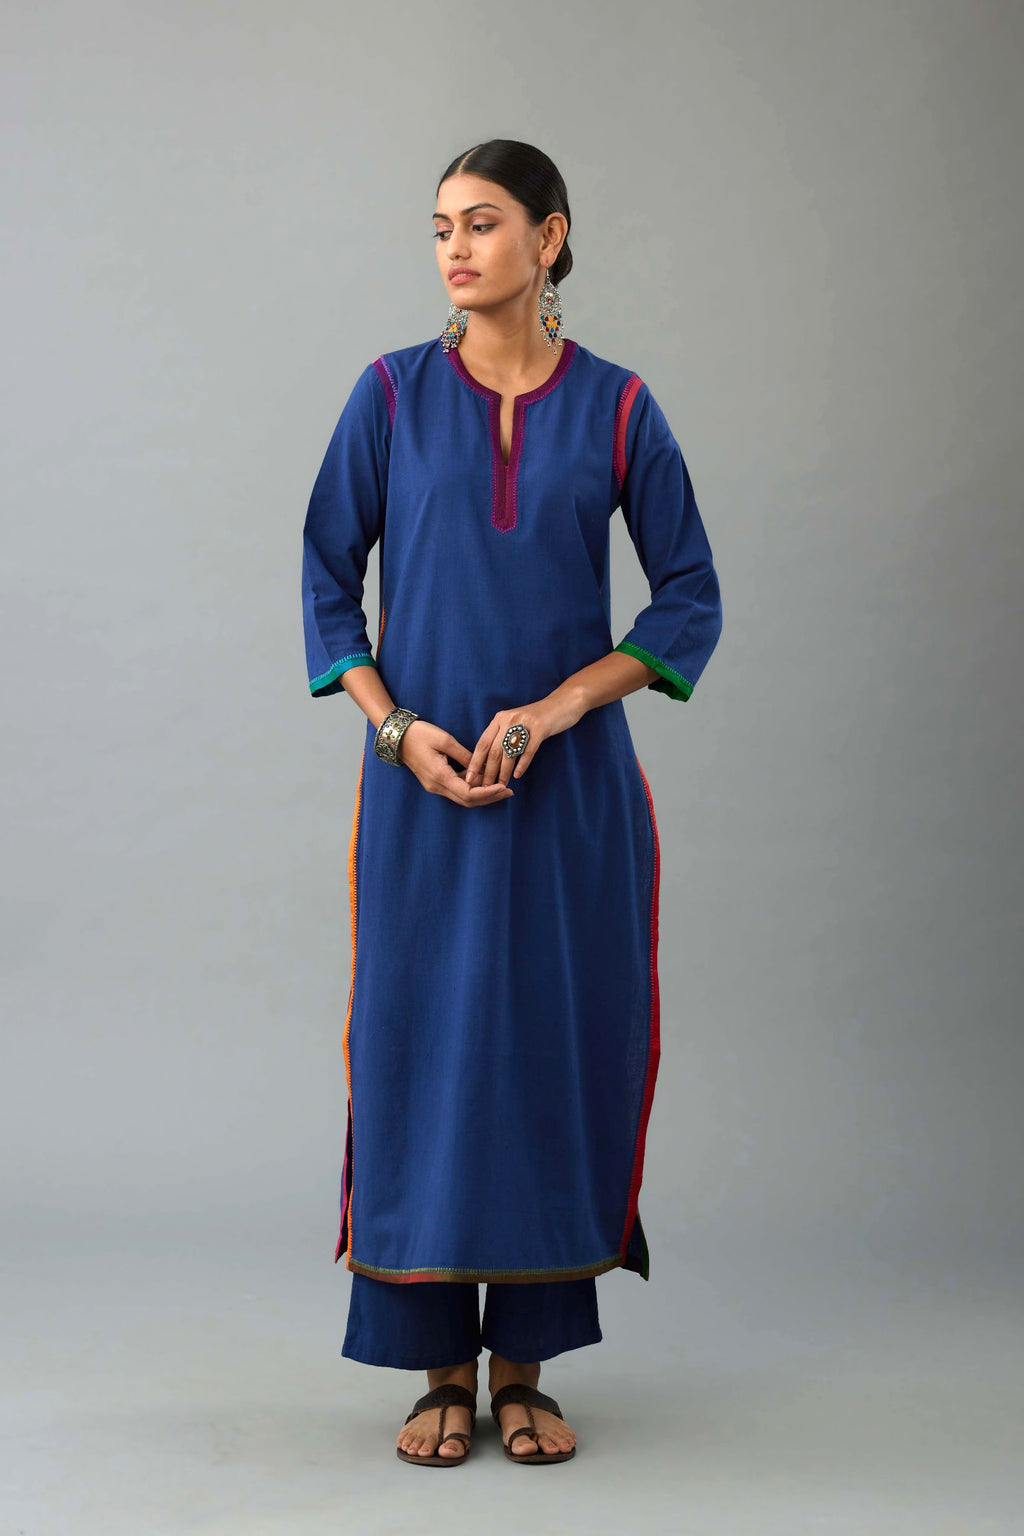 Blue handloom cotton straight kurta set with slit neck, multi colored silk facings and embroidery detail.